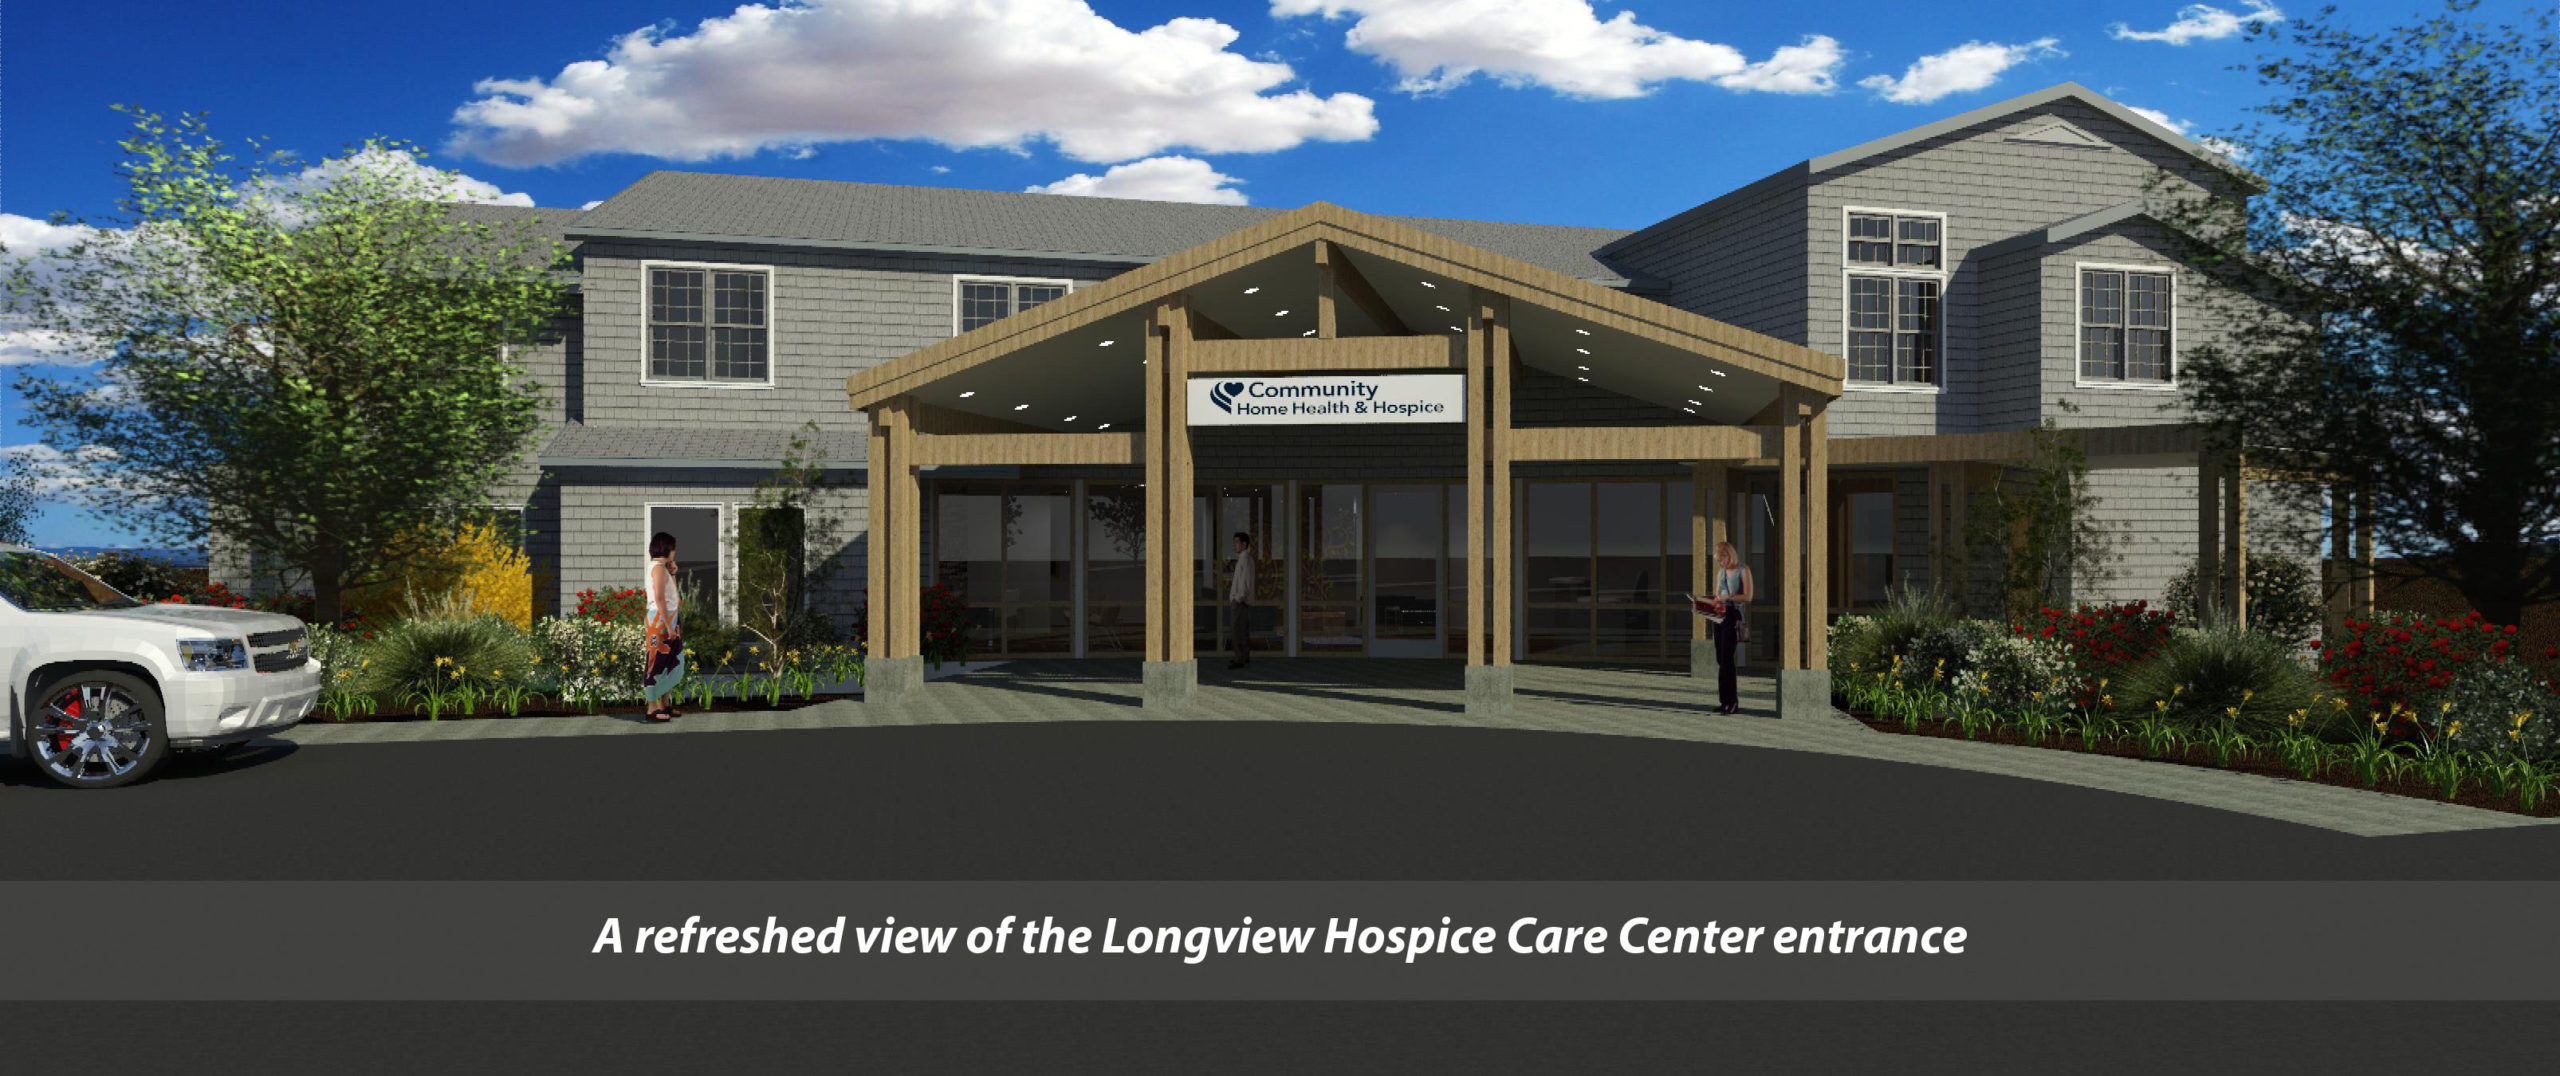 3-D rendering: A refreshed view of the Longview Hospice Care Center entrance